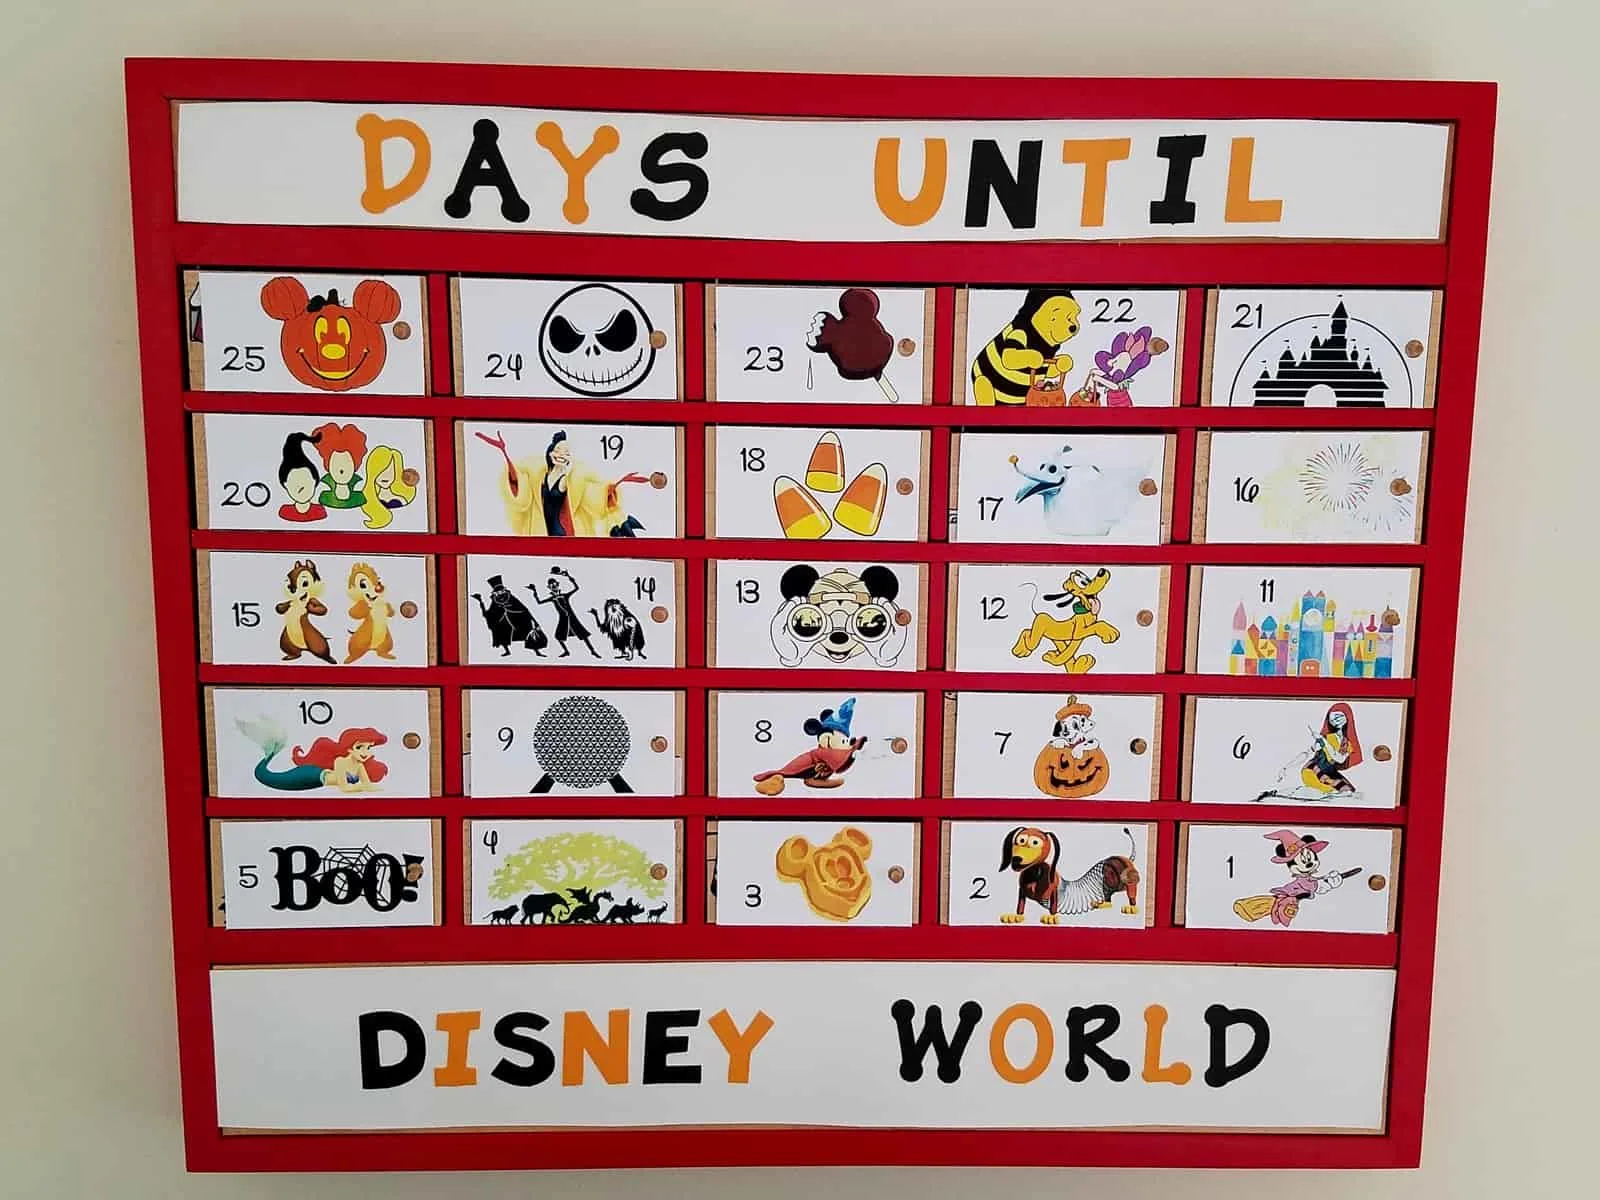 Counting Down to Your Next Disney Vacation